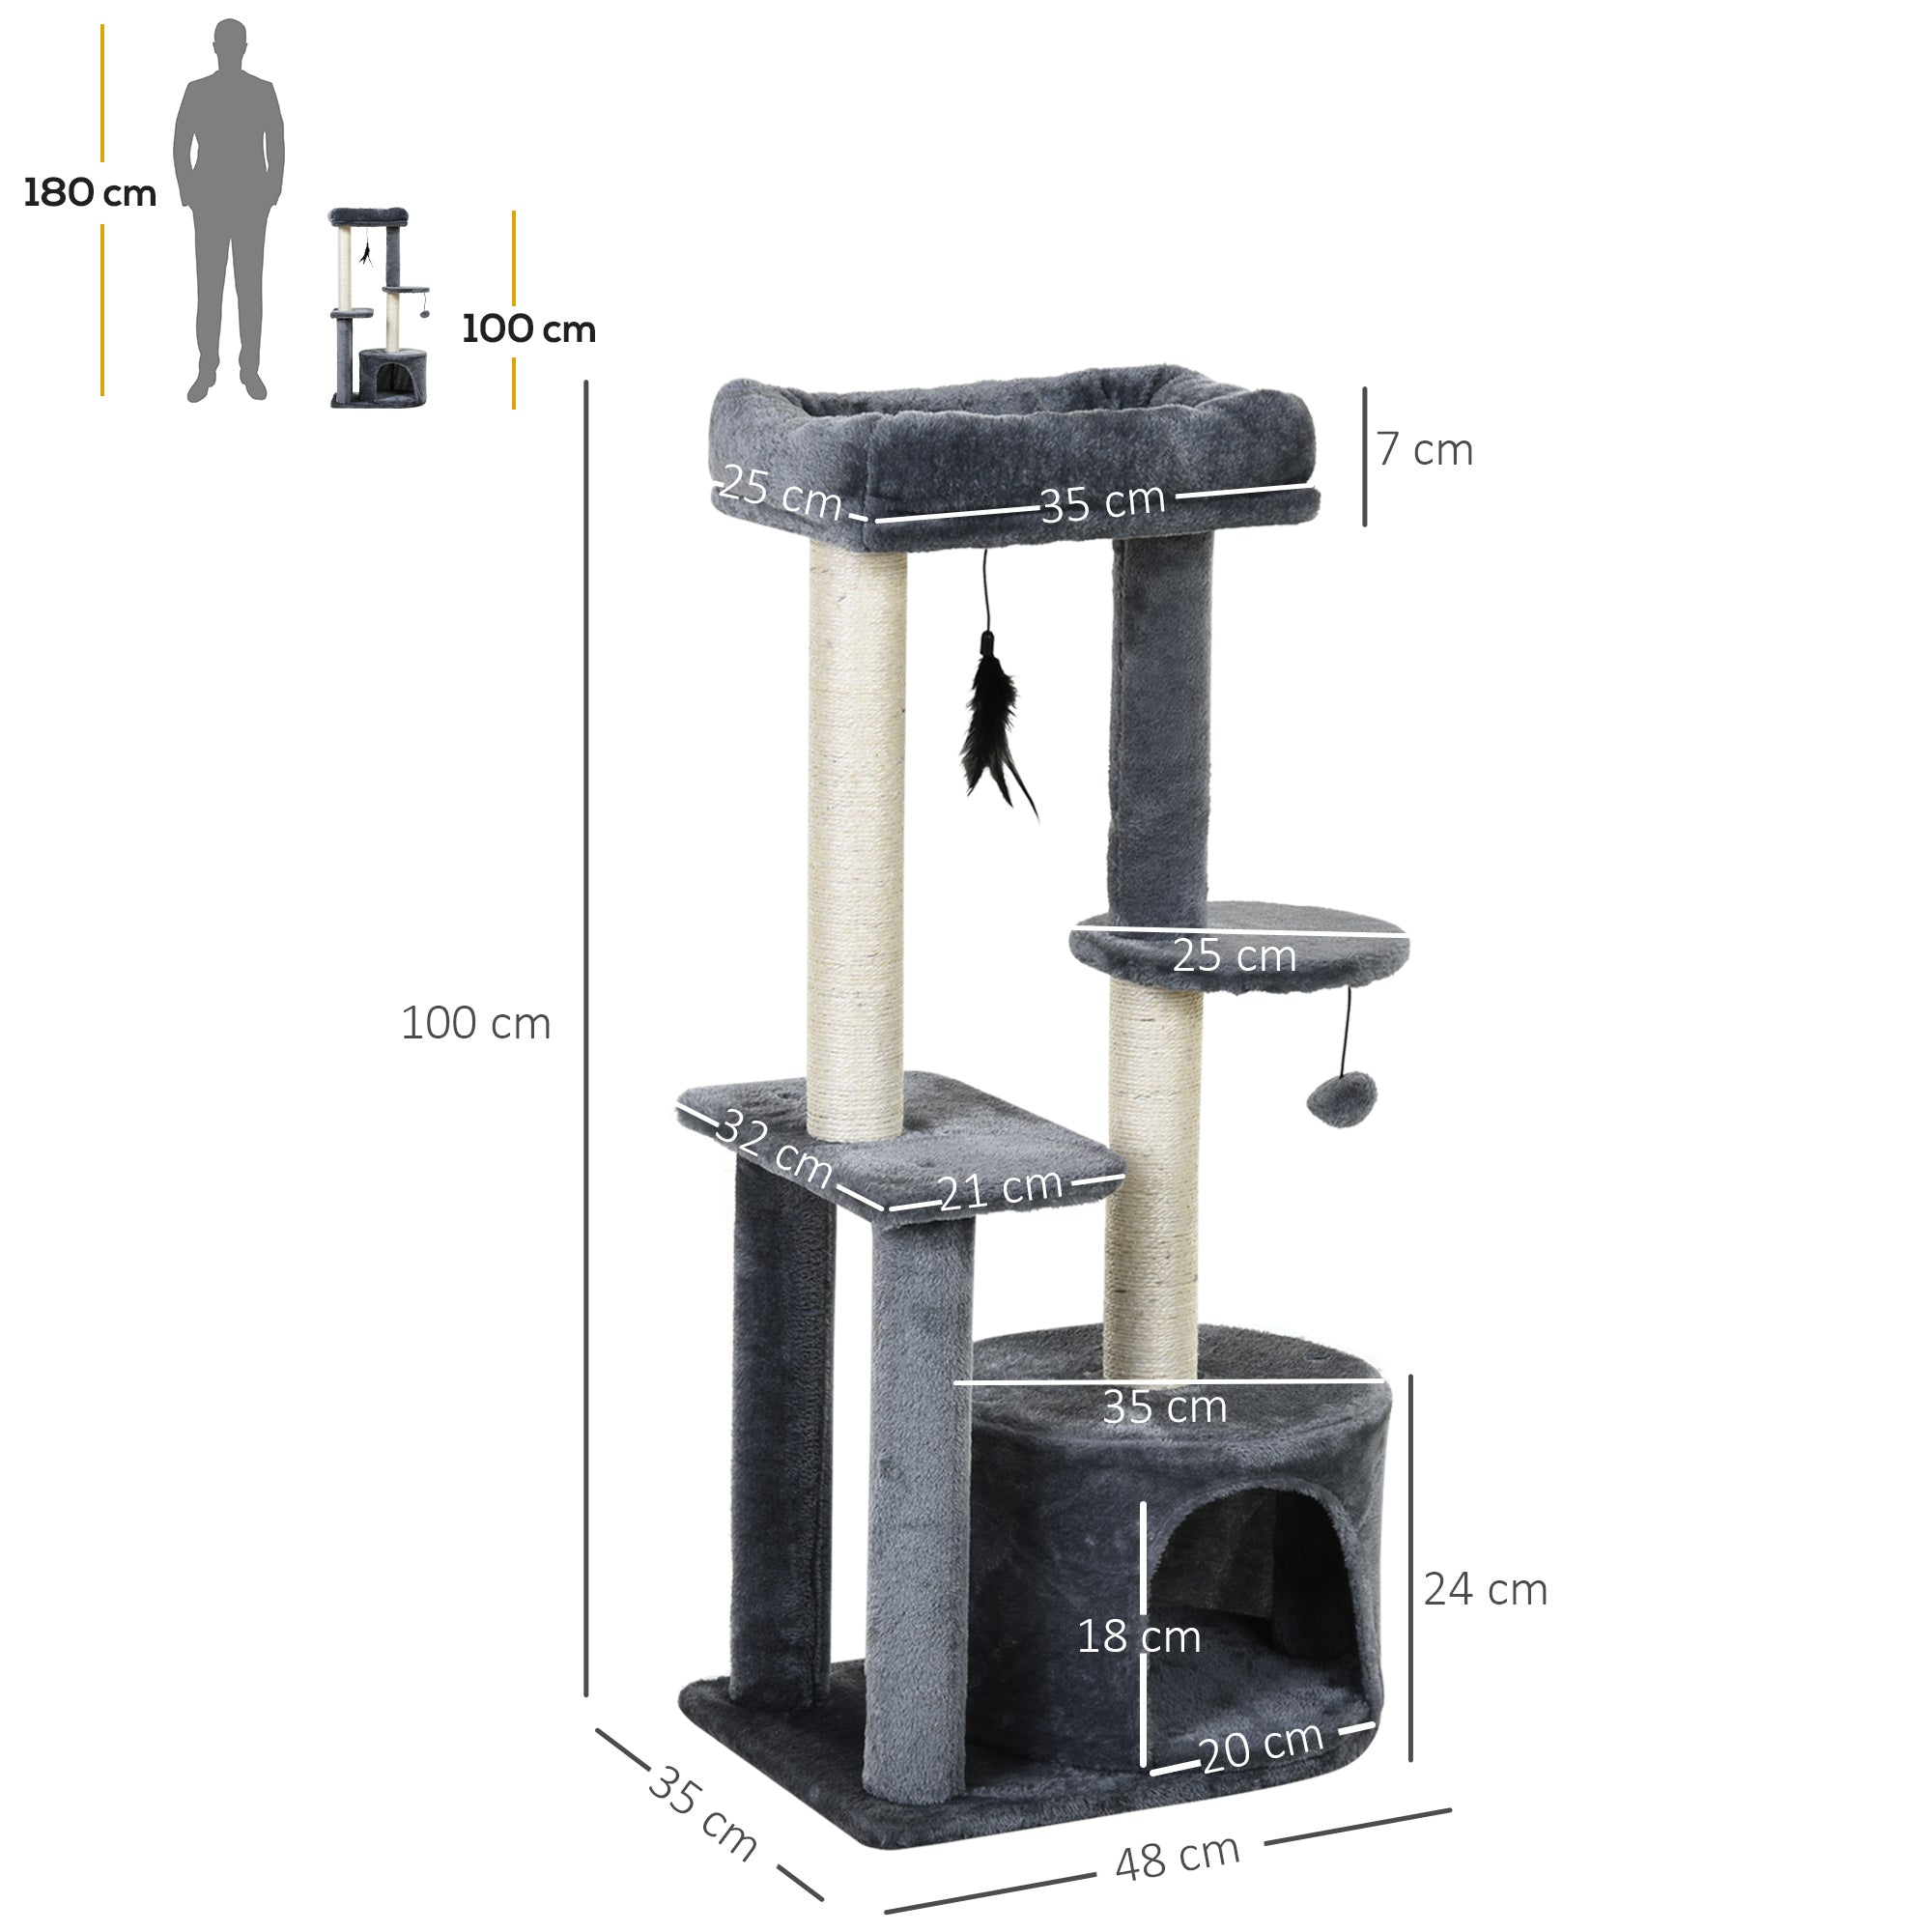 100cm Cat Tree for Indoor Cats, Multi-Activity Cat Tower with Perch House Scratching Post Platform Play Ball Rest Relax, Grey and White-2